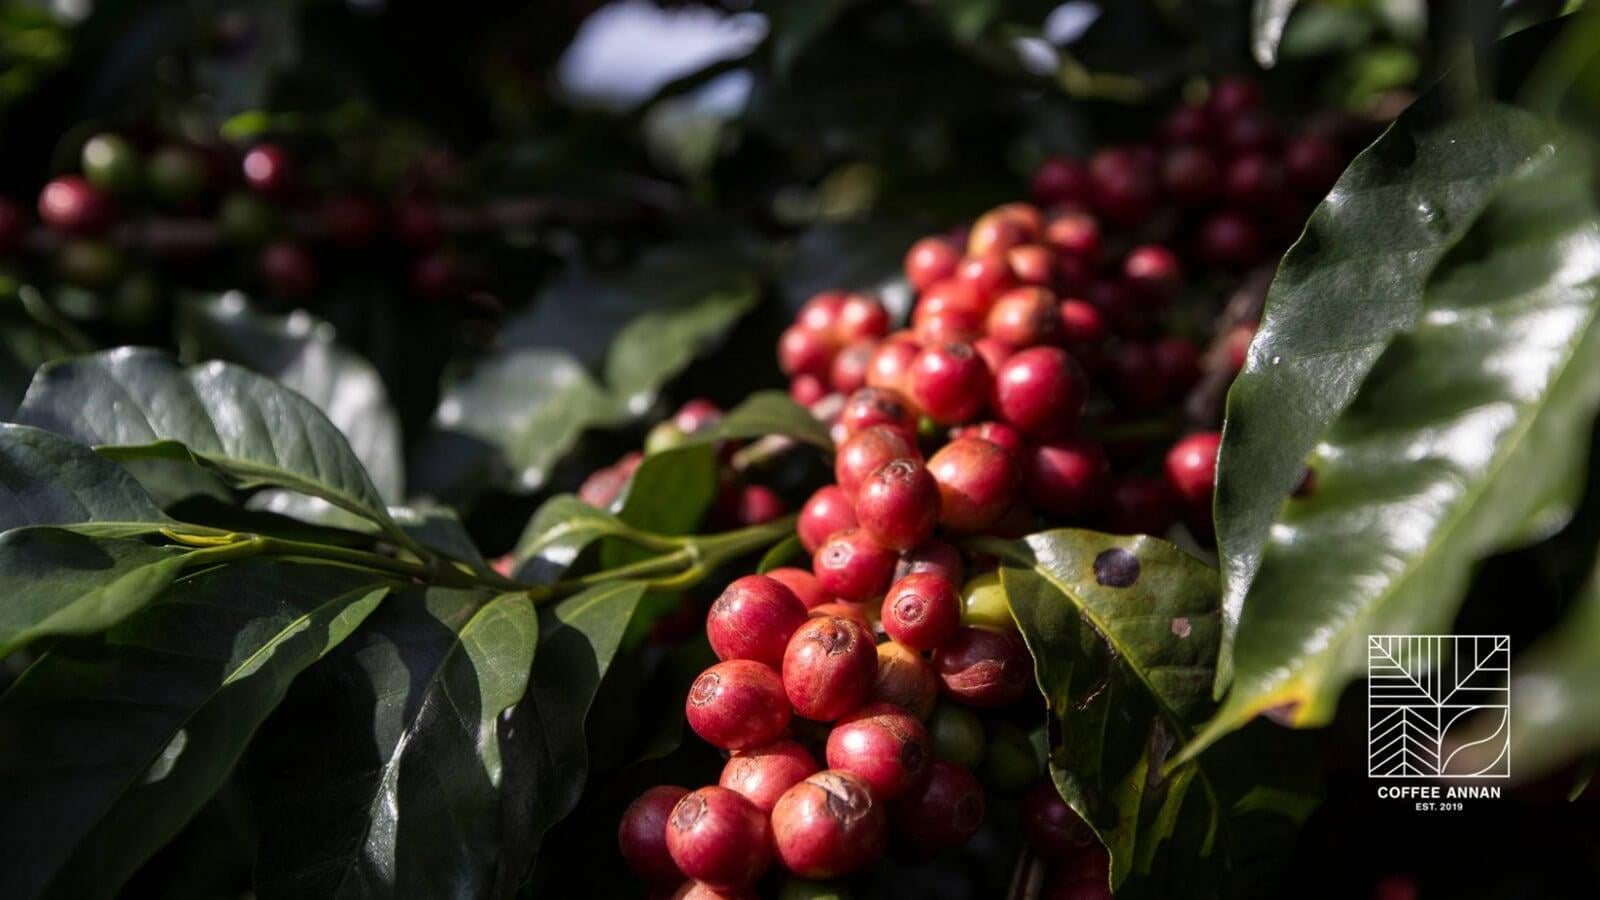 The future of specialty coffee and its potential for global expansion